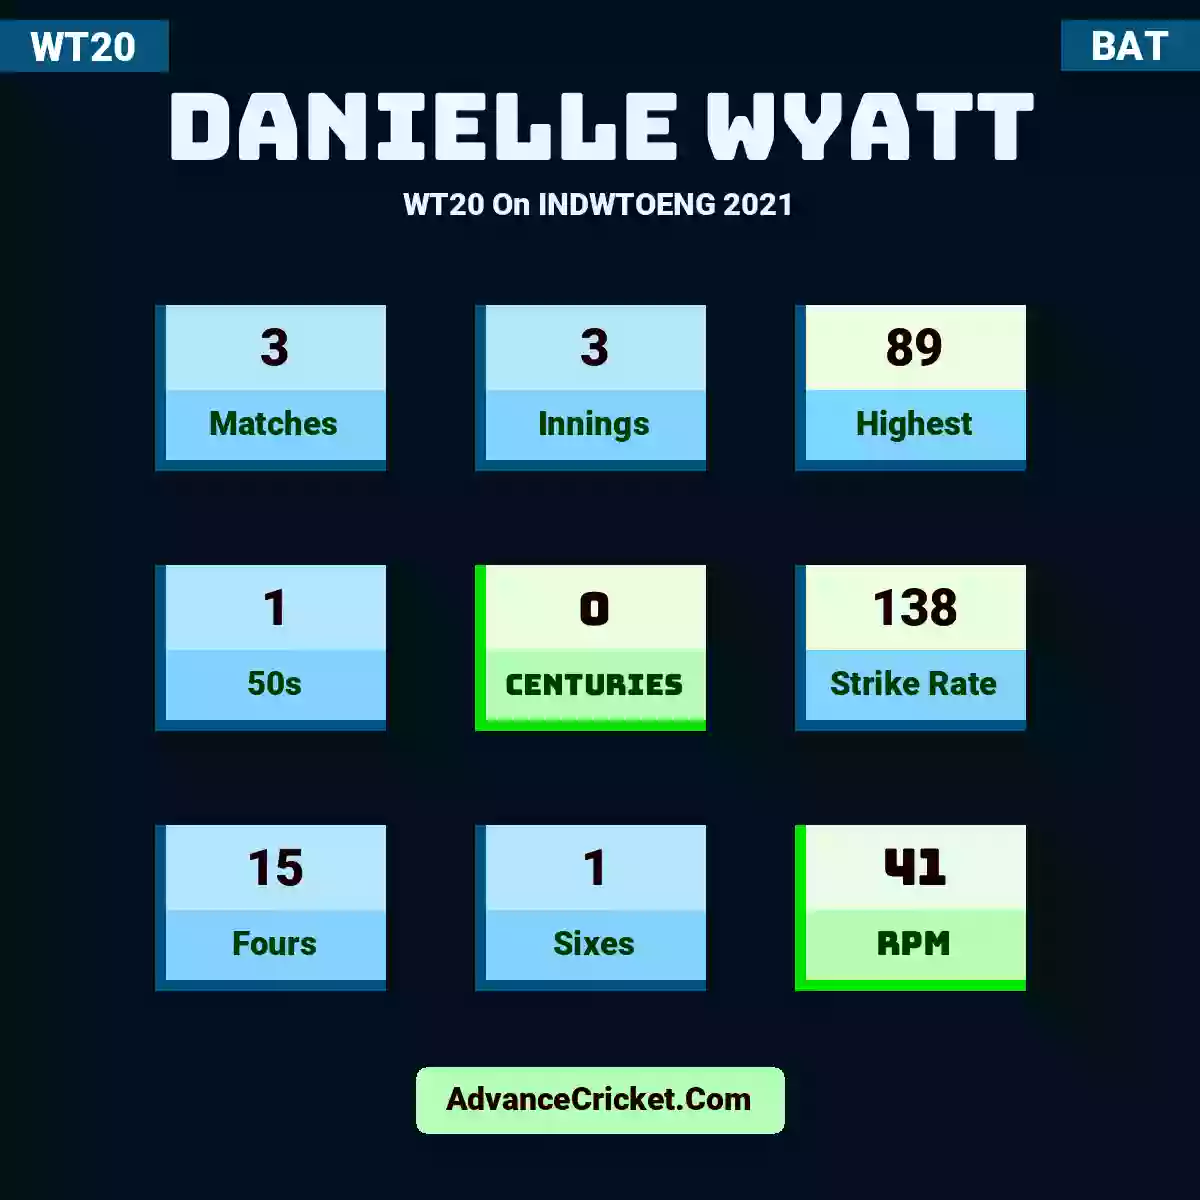 Danielle Wyatt WT20  On INDWTOENG 2021, Danielle Wyatt played 3 matches, scored 89 runs as highest, 1 half-centuries, and 0 centuries, with a strike rate of 138. D.Wyatt hit 15 fours and 1 sixes, with an RPM of 41.